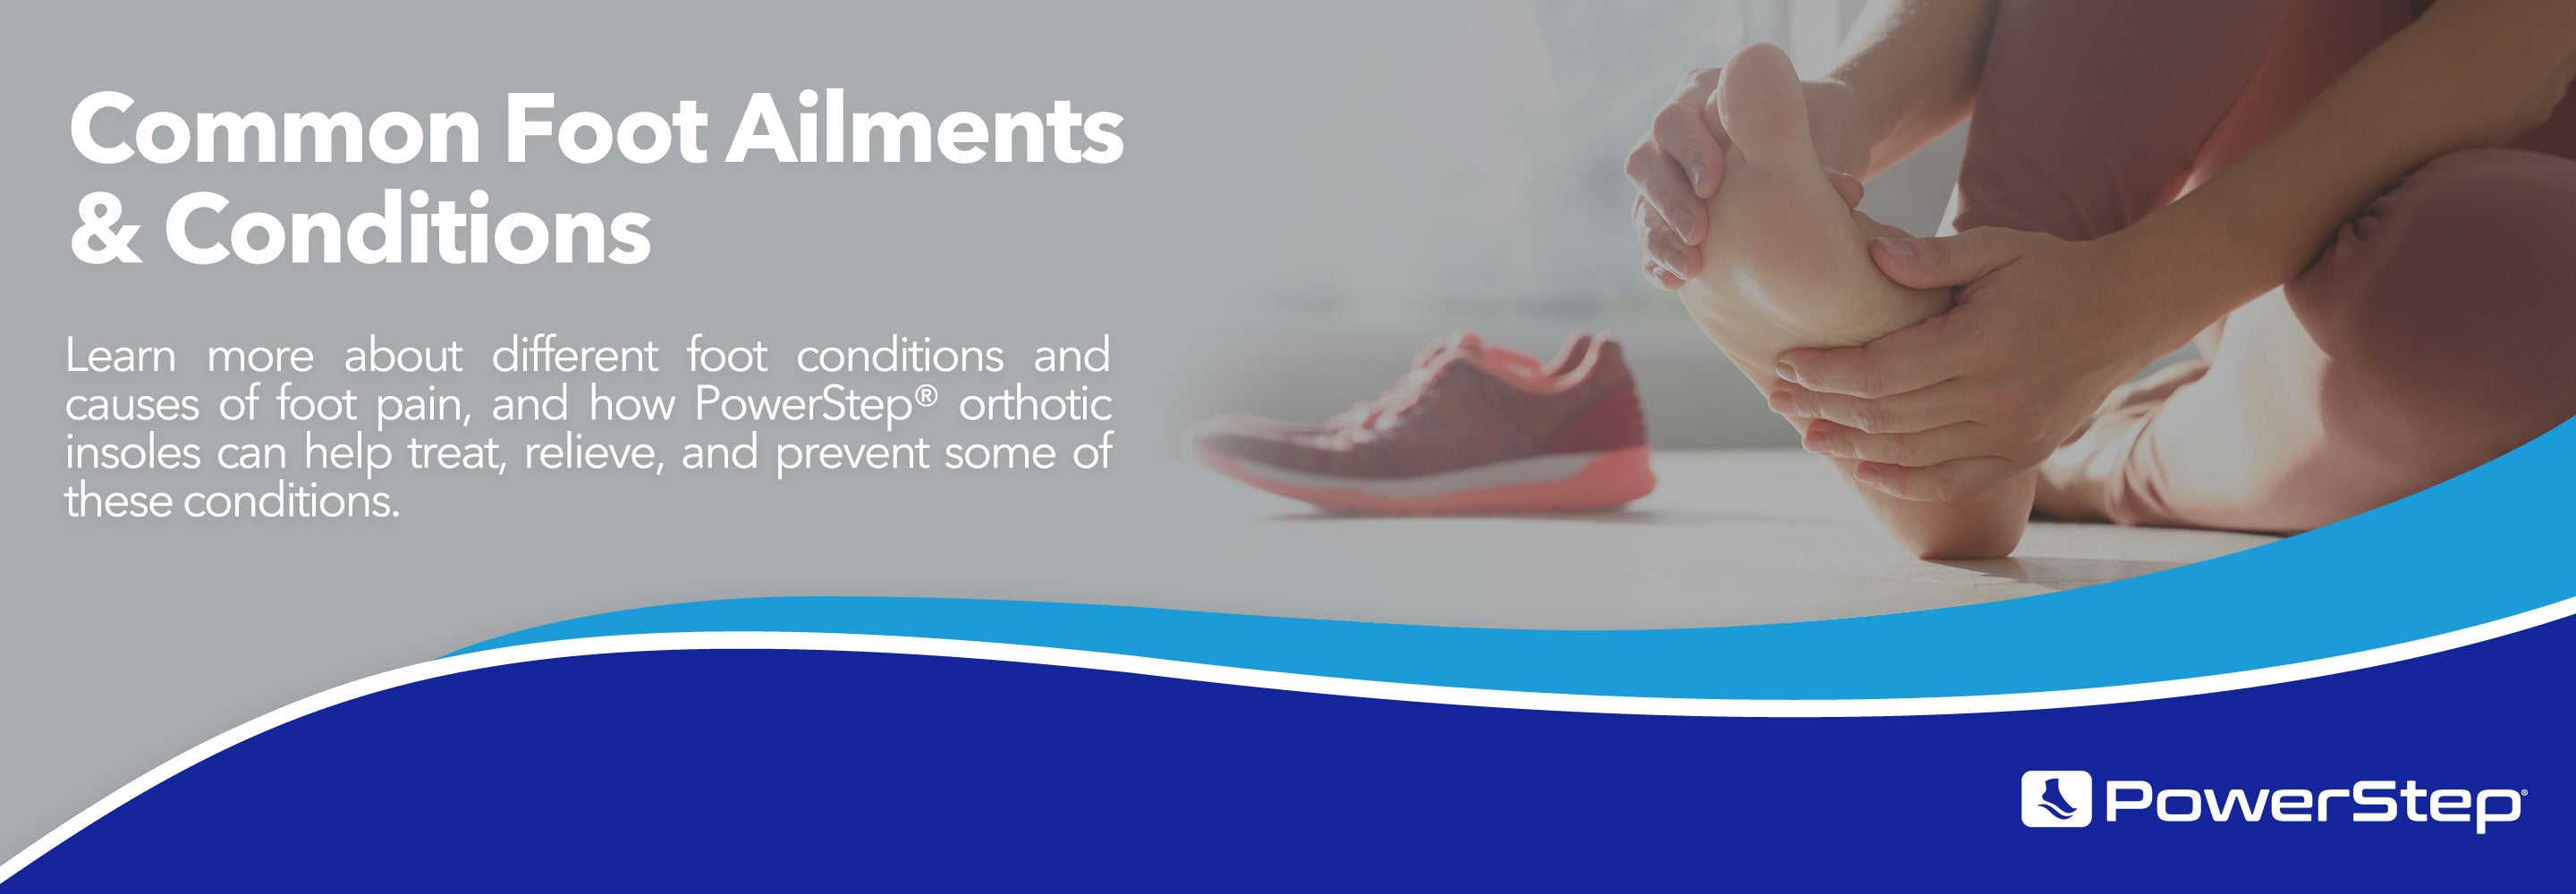 Common Foot Ailments & Conditions: Learn more about different foot conditions and causes of foot pain, and how PowerStep® orthotic insoles can help treat, relieve, and prevent some of these conditions.